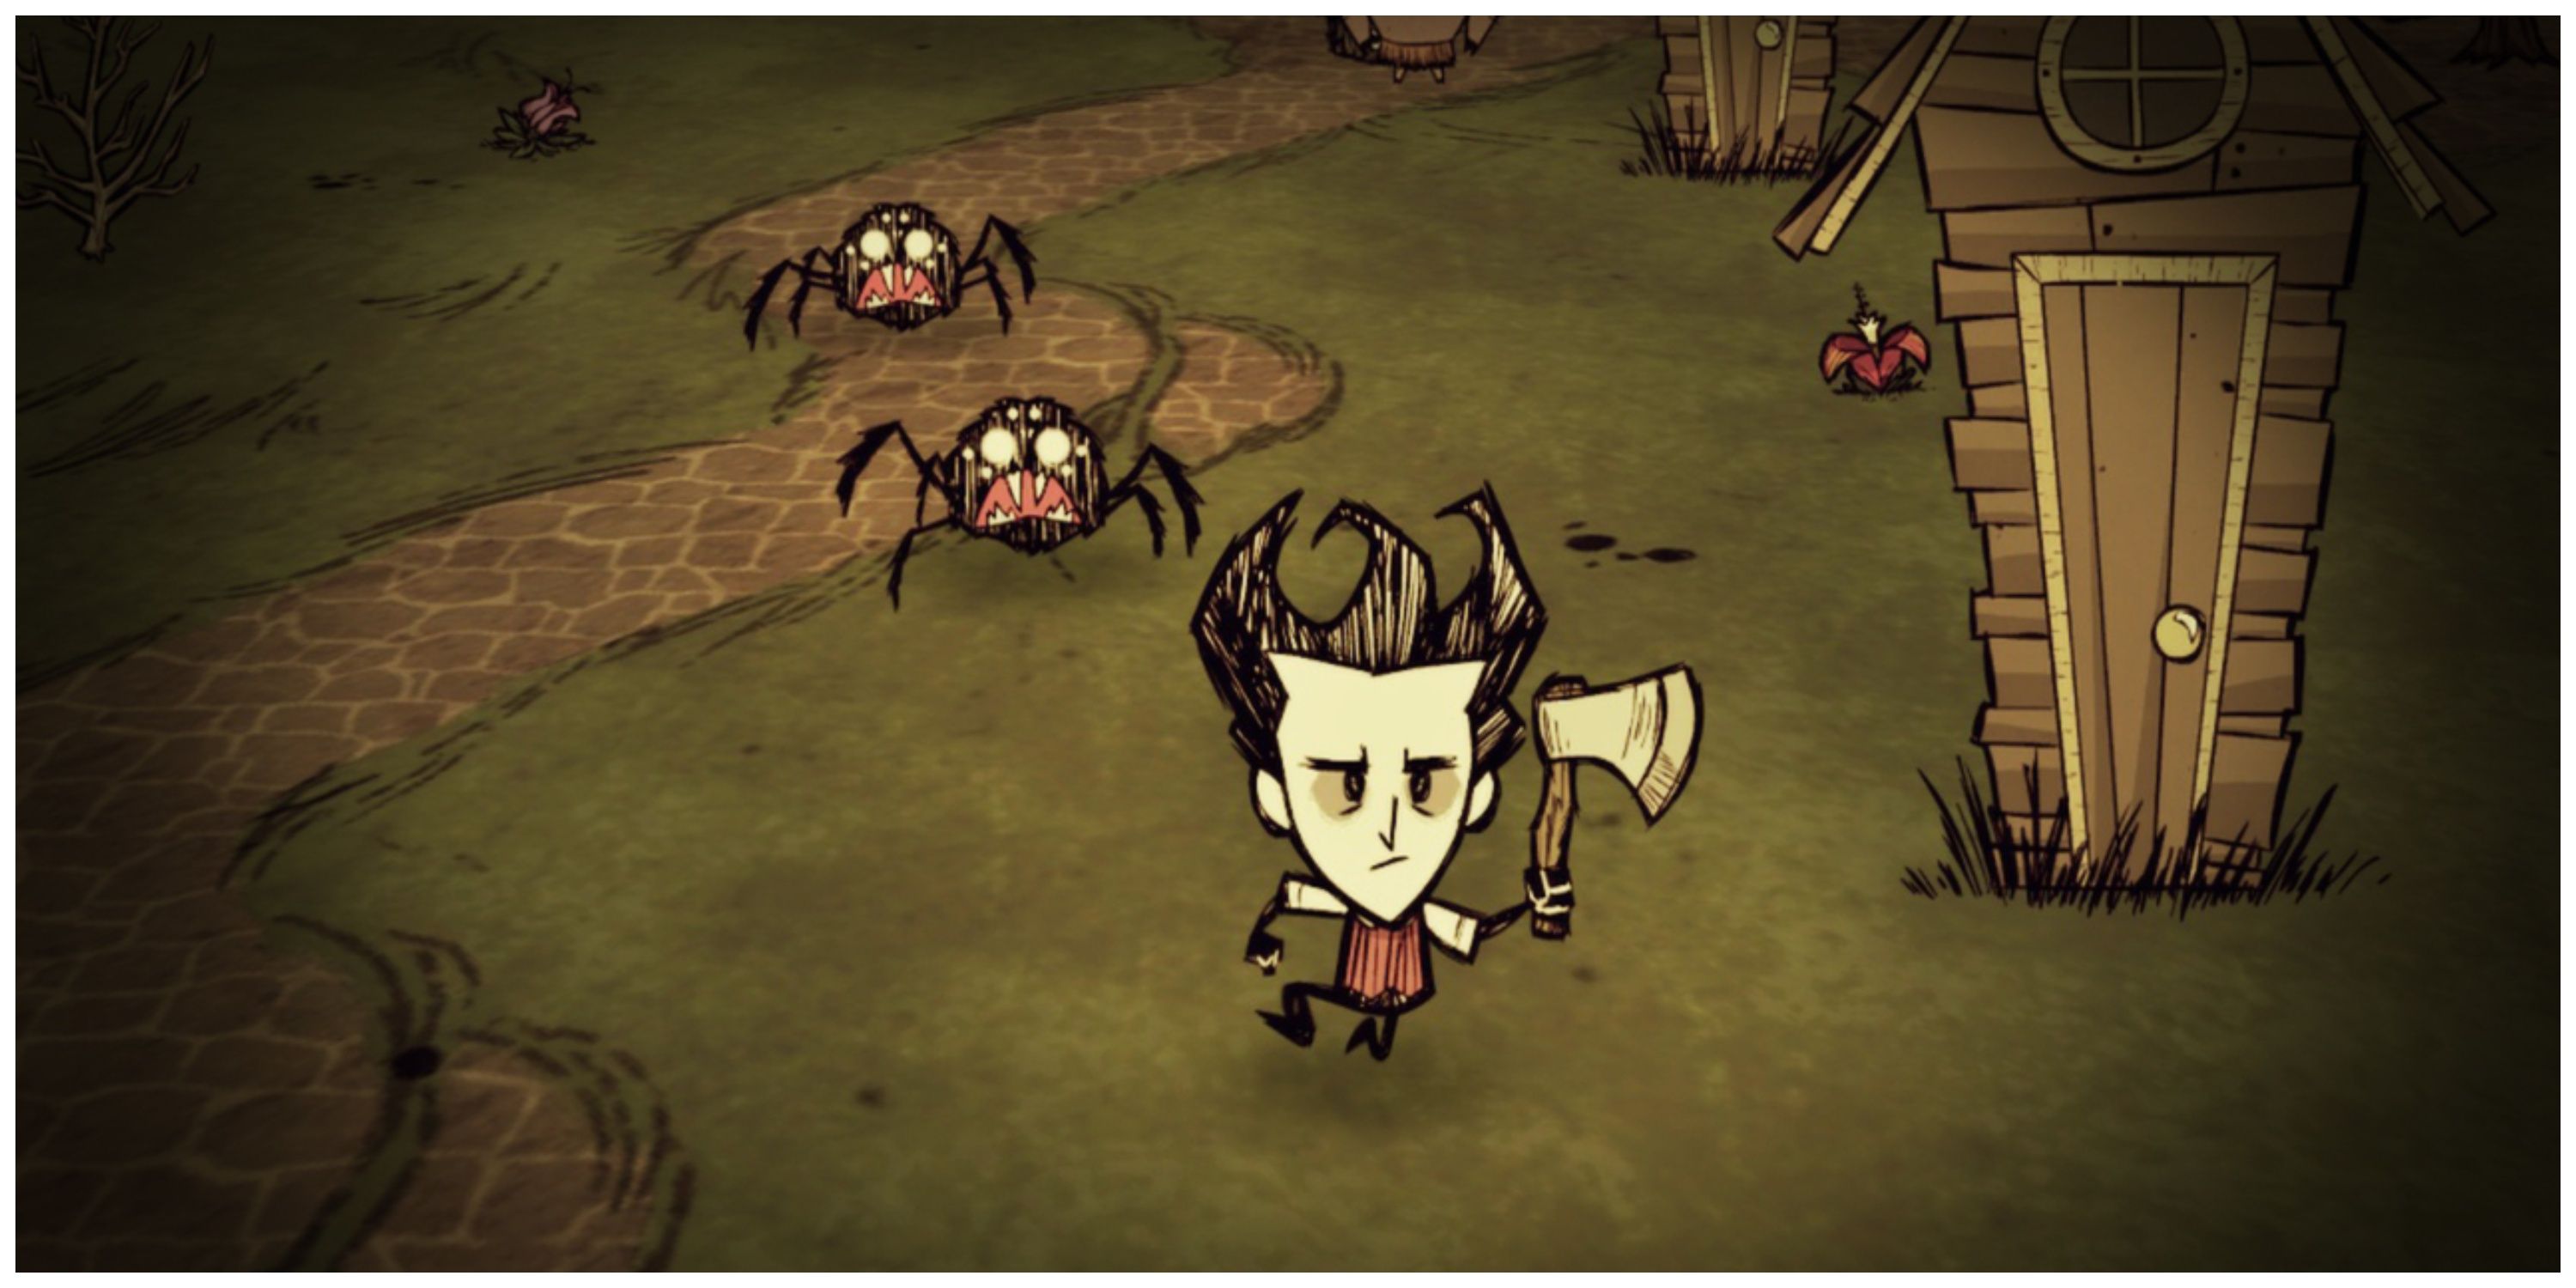 Don't Starve - Running From Spiders